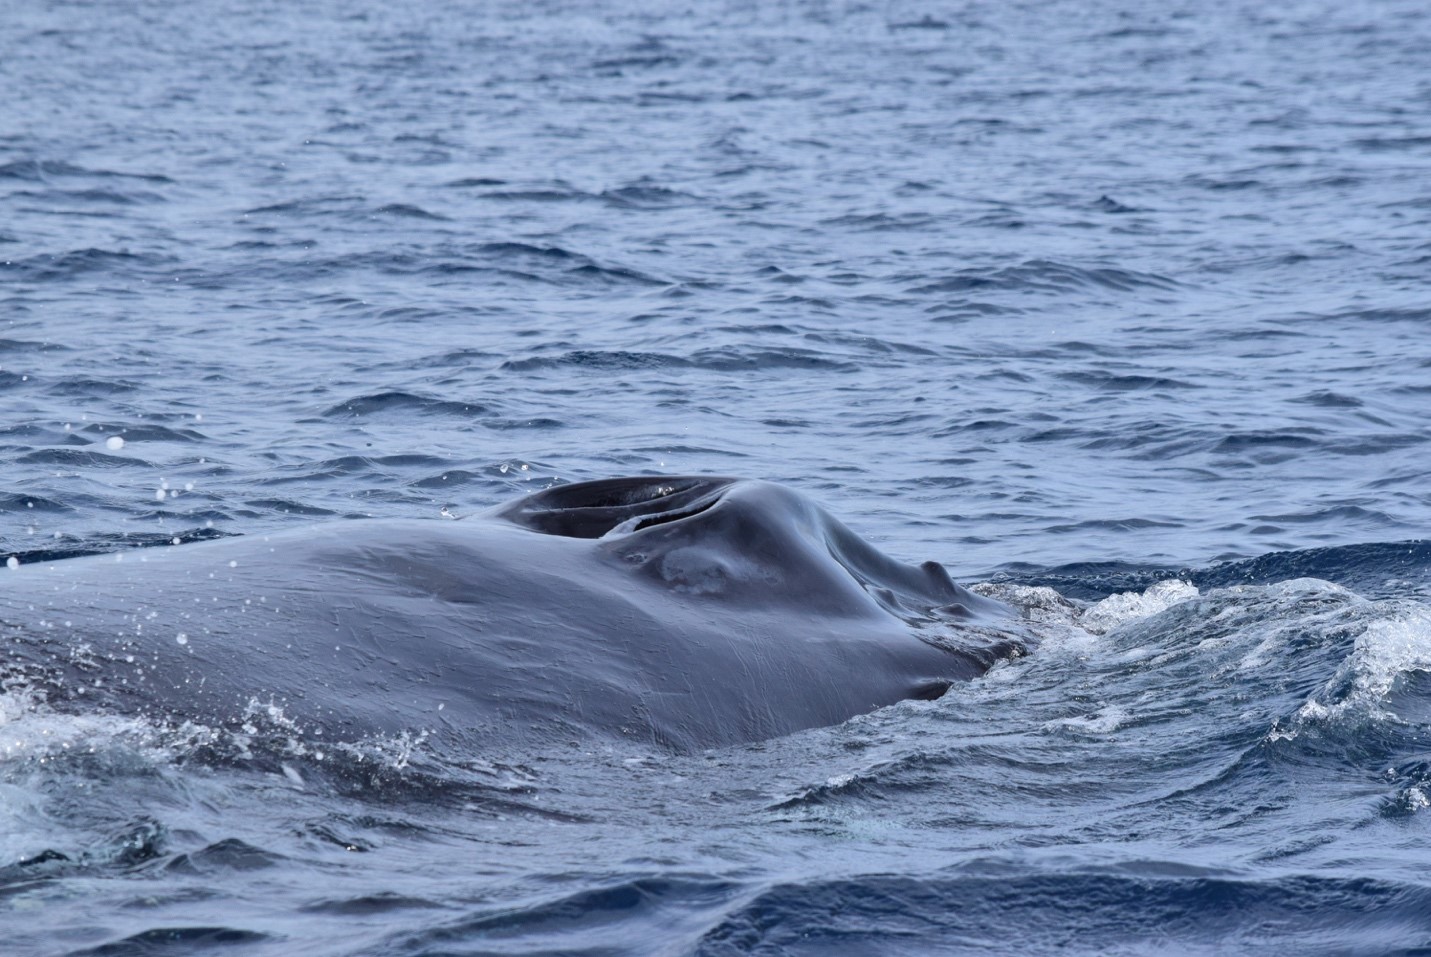 My First Close Encounter with Two Humpback Whales – 31/12/19